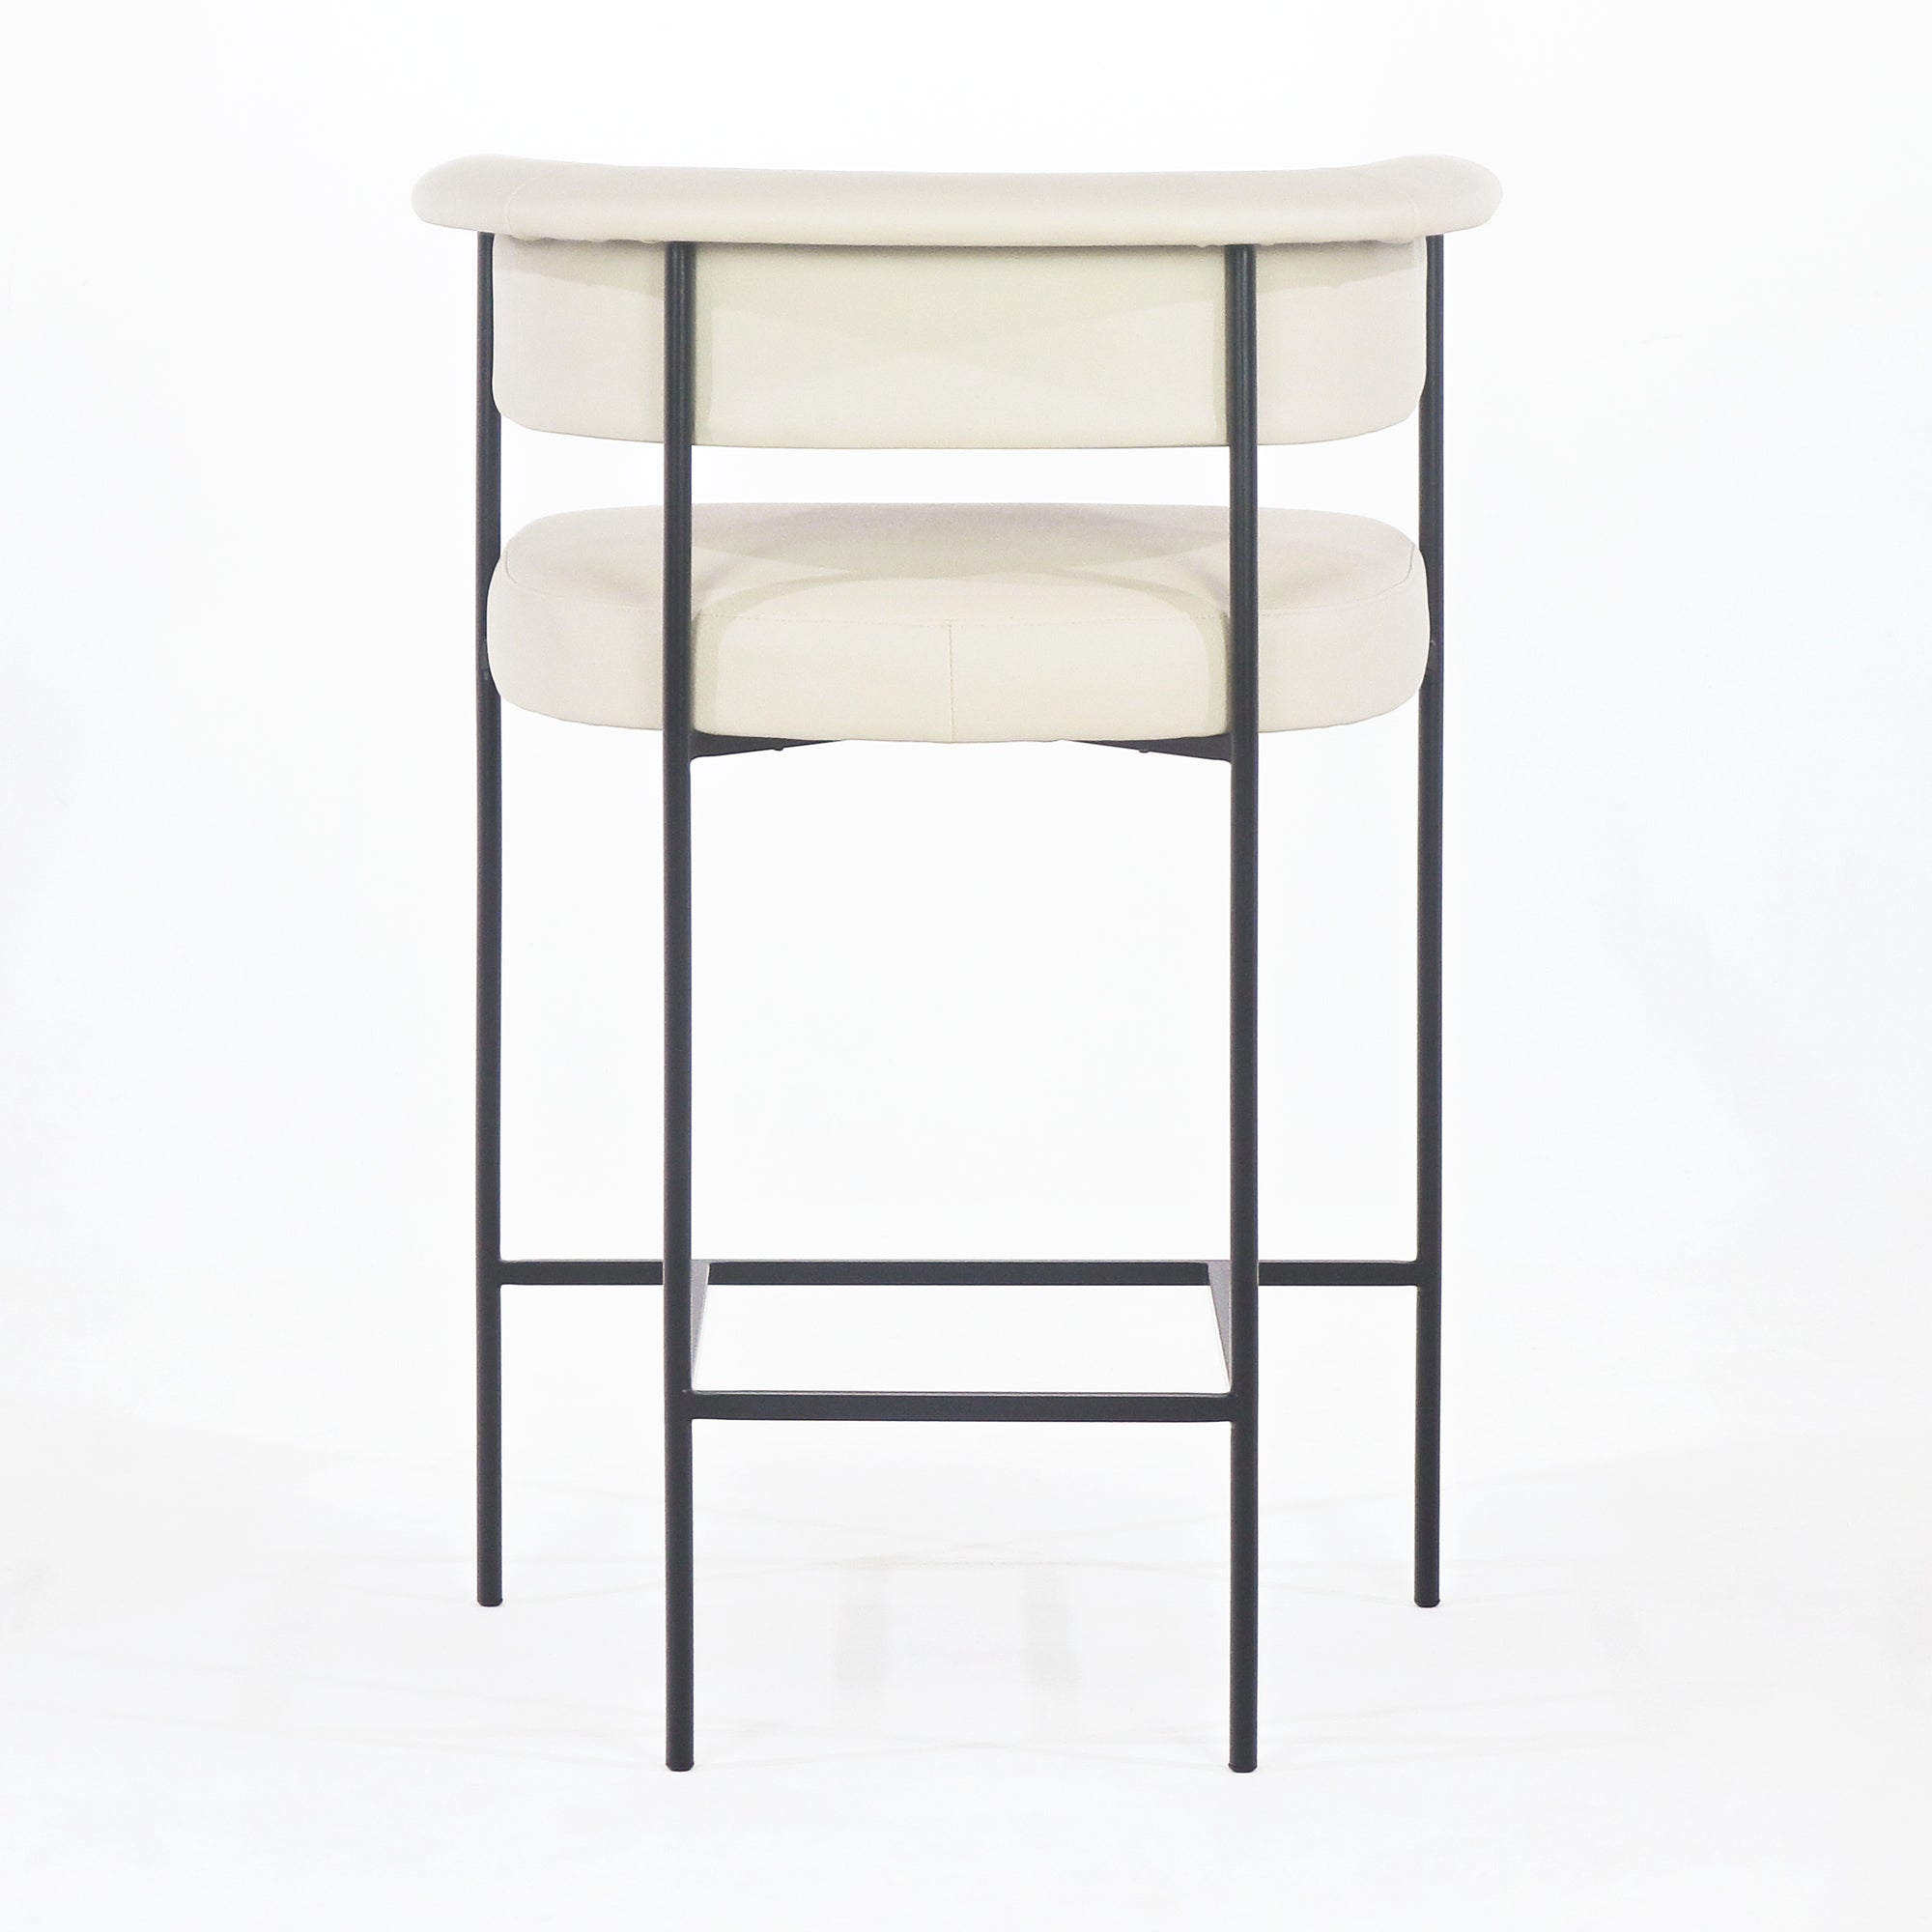 Mikra Counter & Bar Stool with Leather - INTERIORTONIC